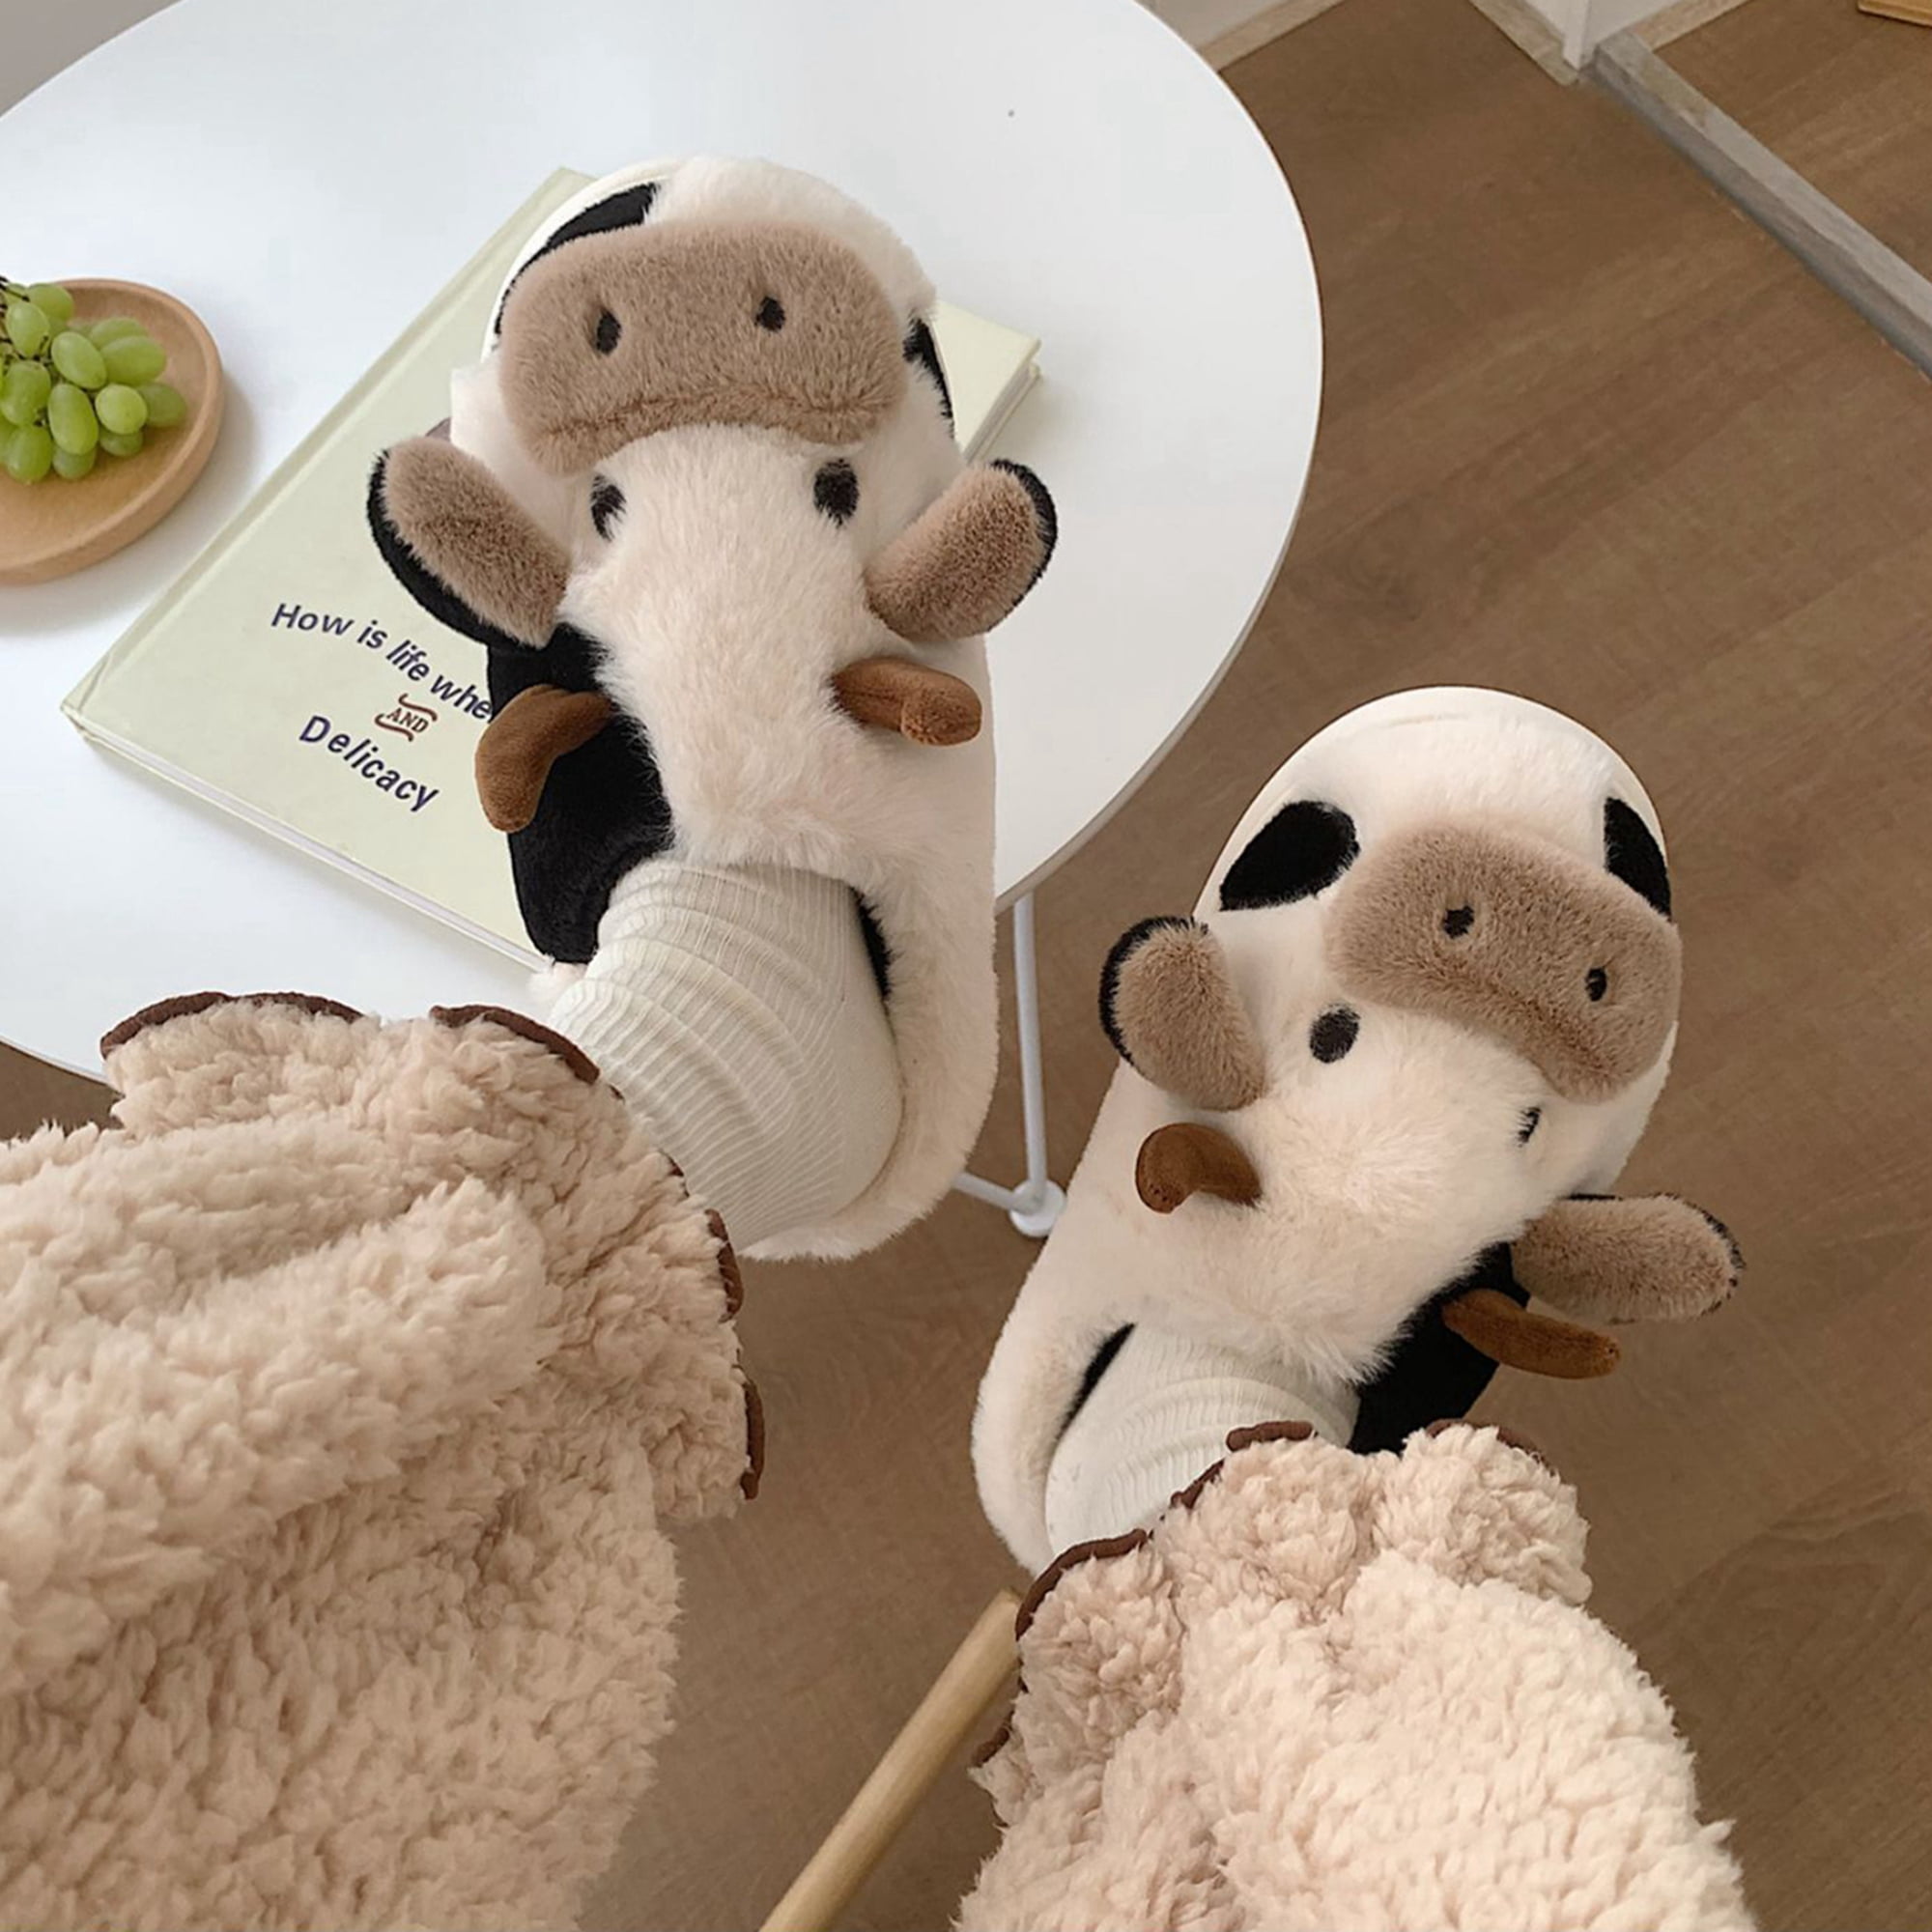 Indføre økologisk At give tilladelse Licupiee Women Fuzzy Cute Cow Animal Slippers Cotton Warm House Non-Slip  Slides Soft Plush kawaii Home Slippers Shoes - Walmart.com